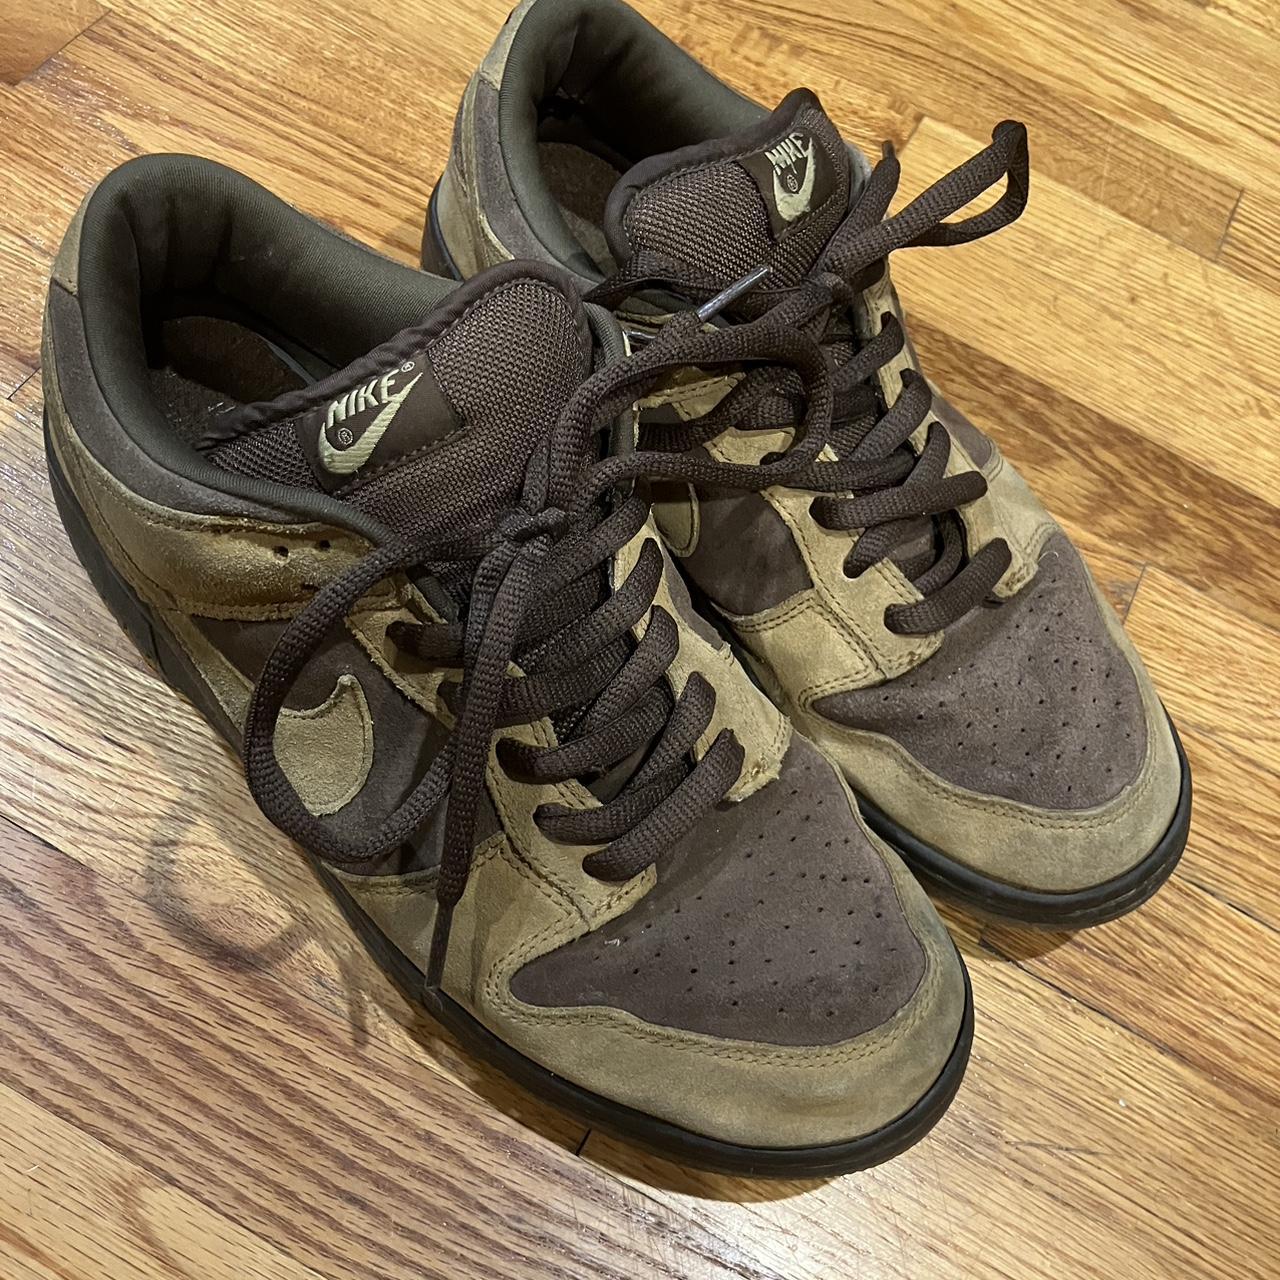 NIKE SB LOW TOP BROWN DUNKS WERE BEATERS FOR A GOOD... - Depop